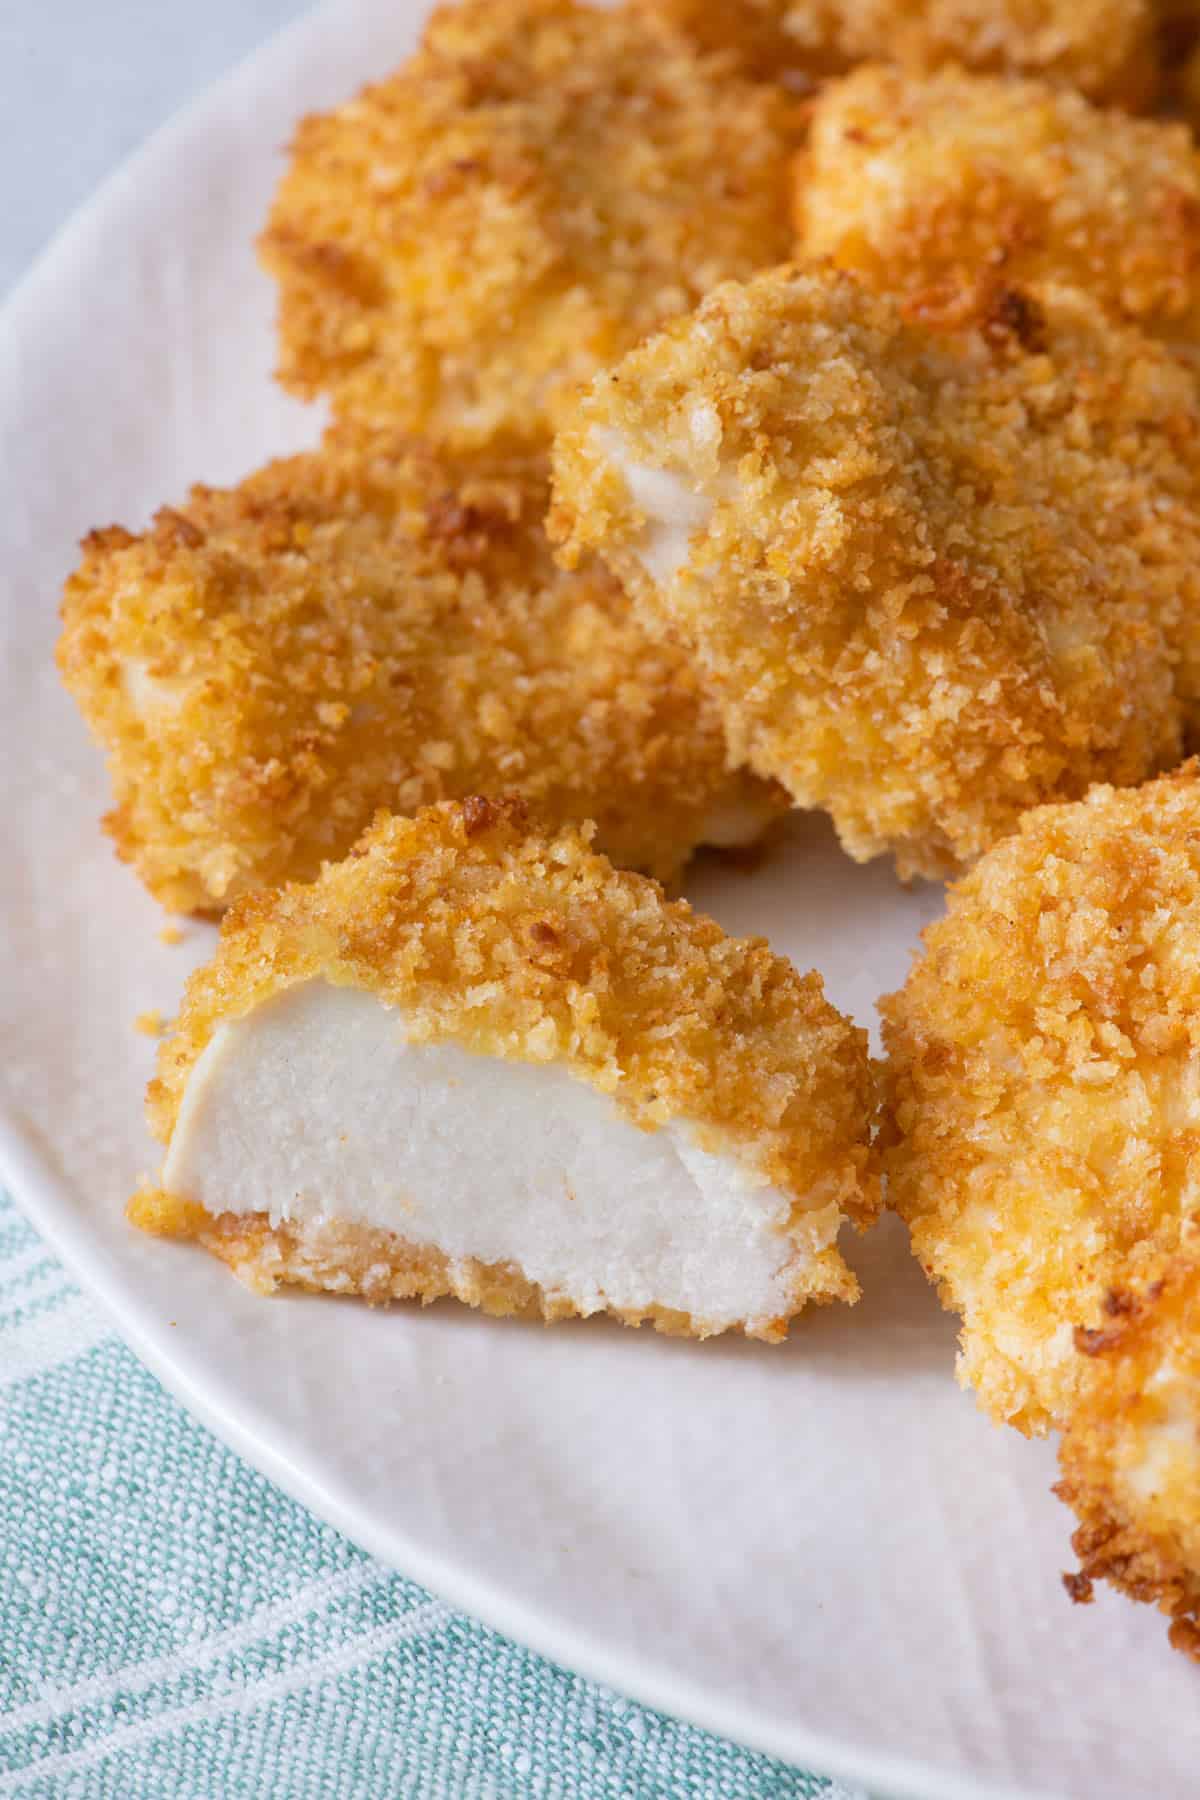 Close up shot of half of a plate of chicken nuggets with one cut open to show the inside of the chicken nugget.